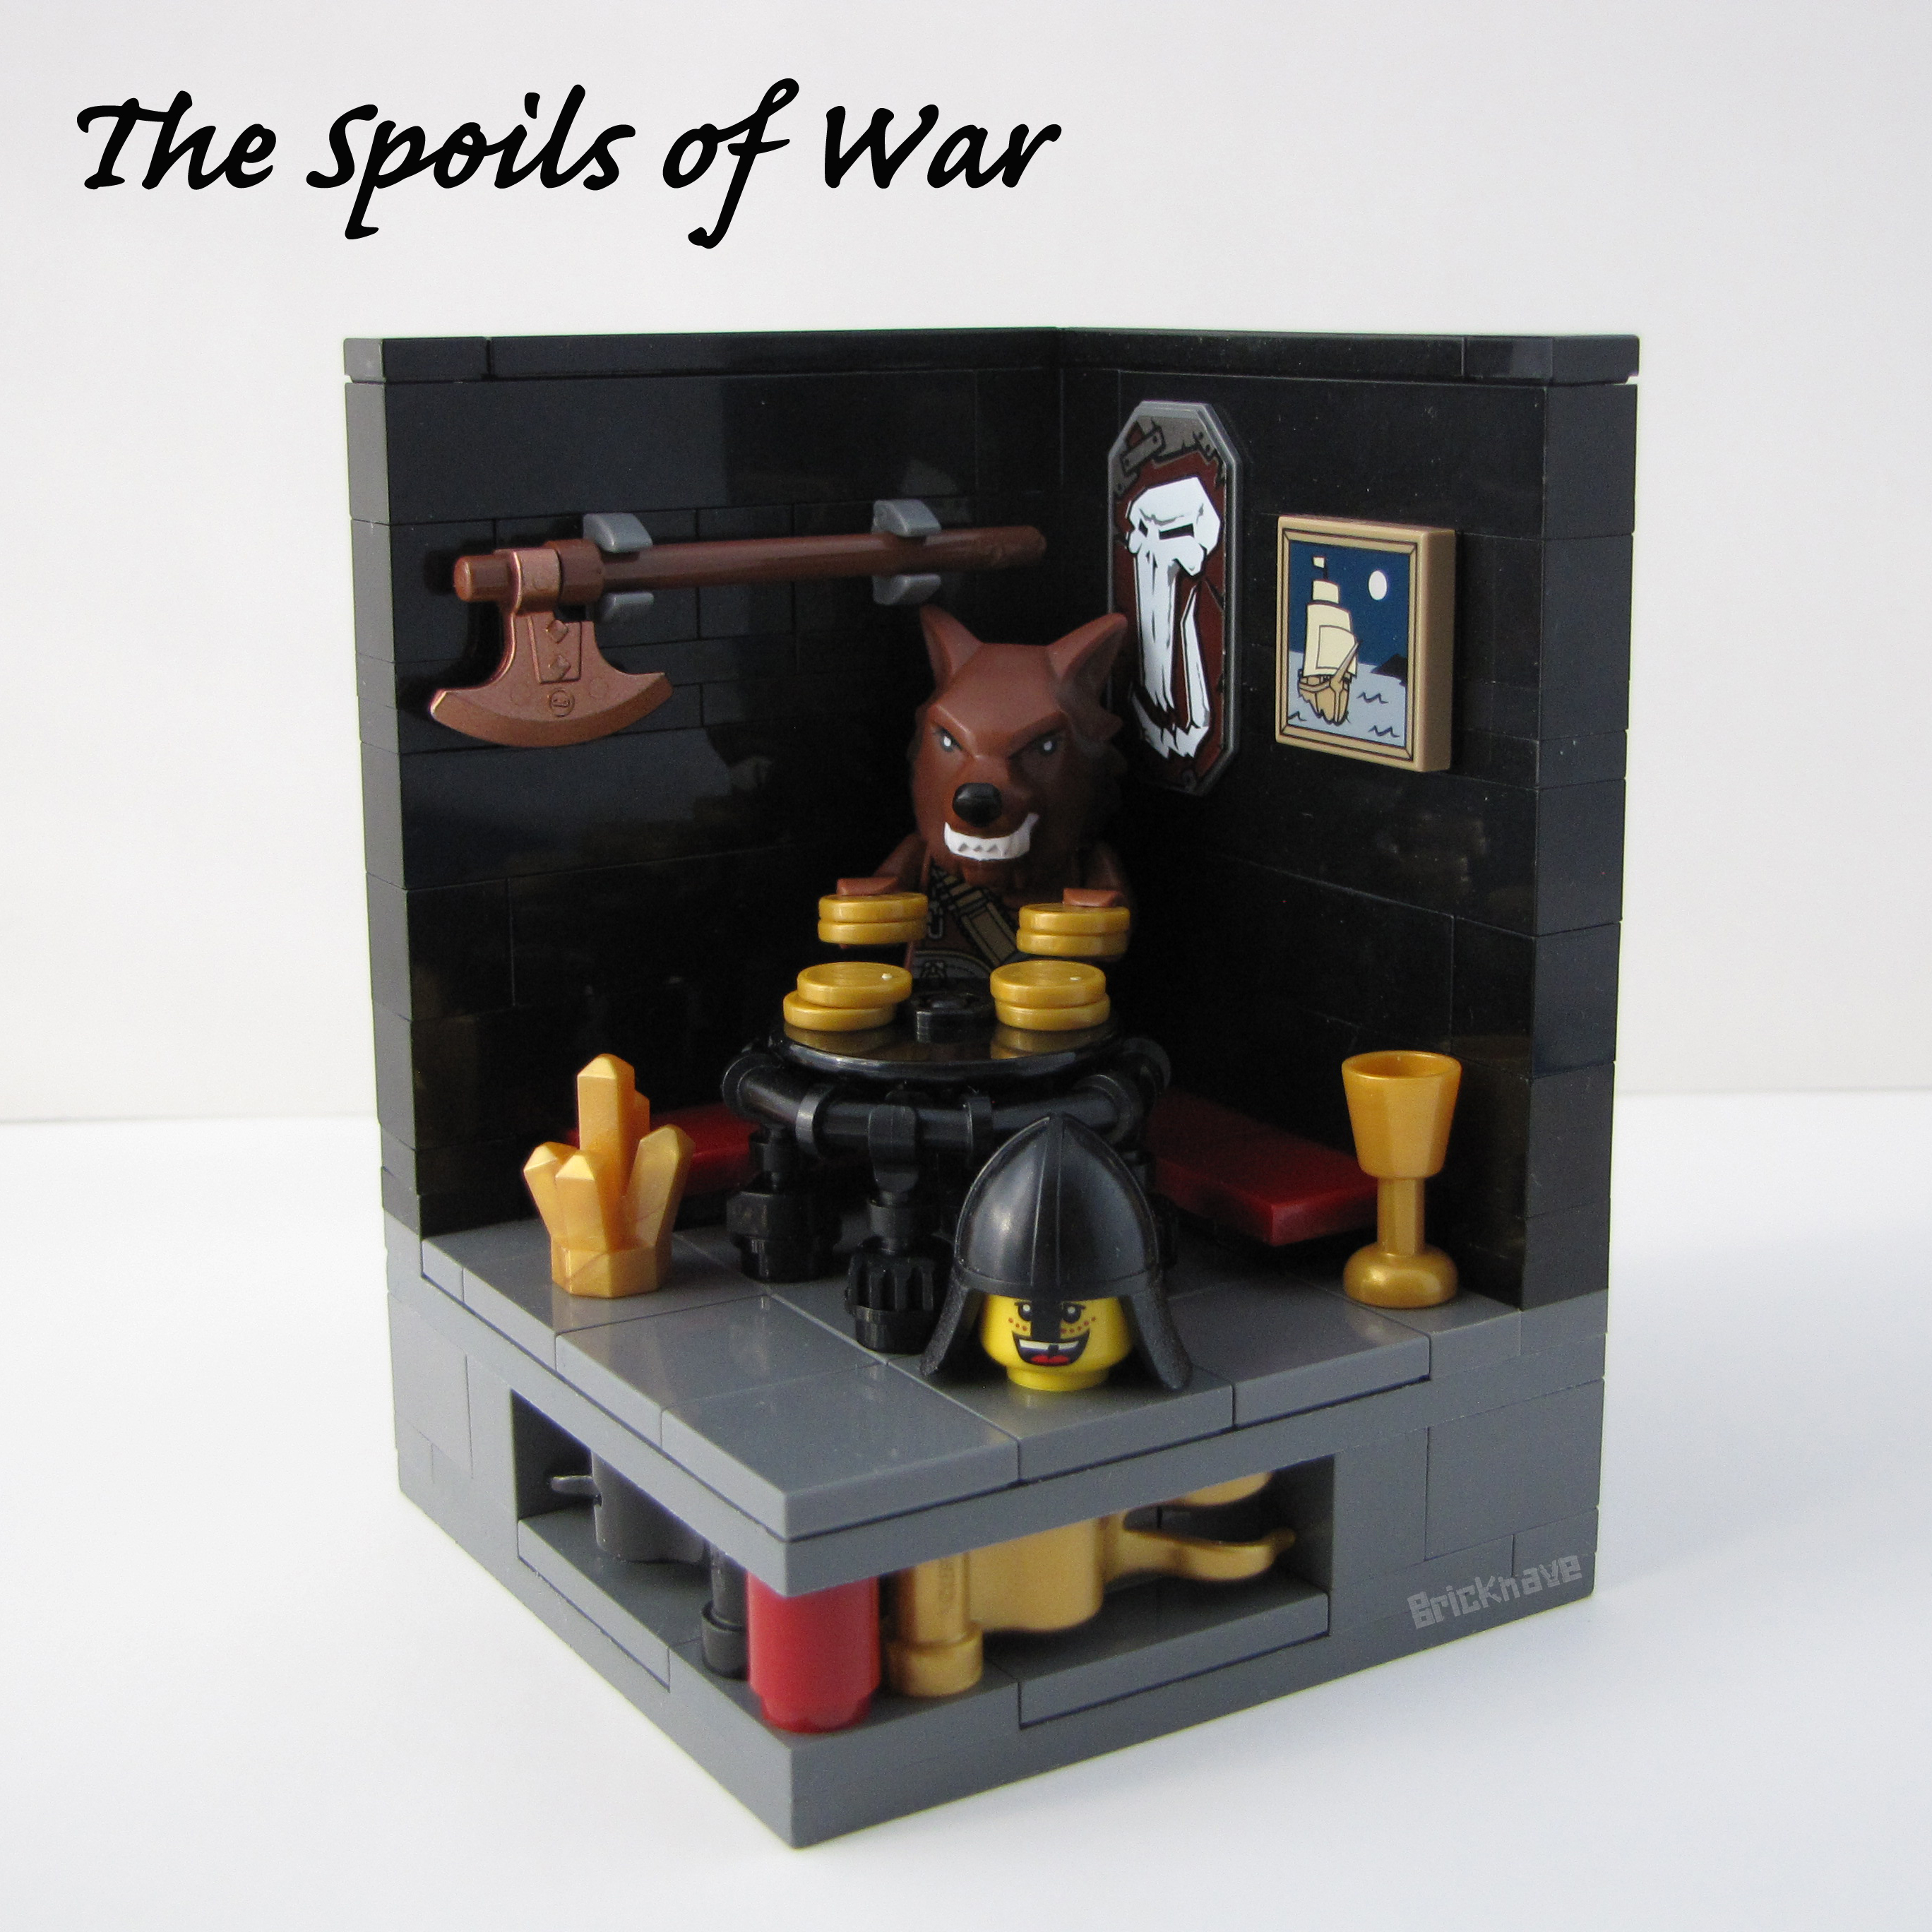 The Spoils of War